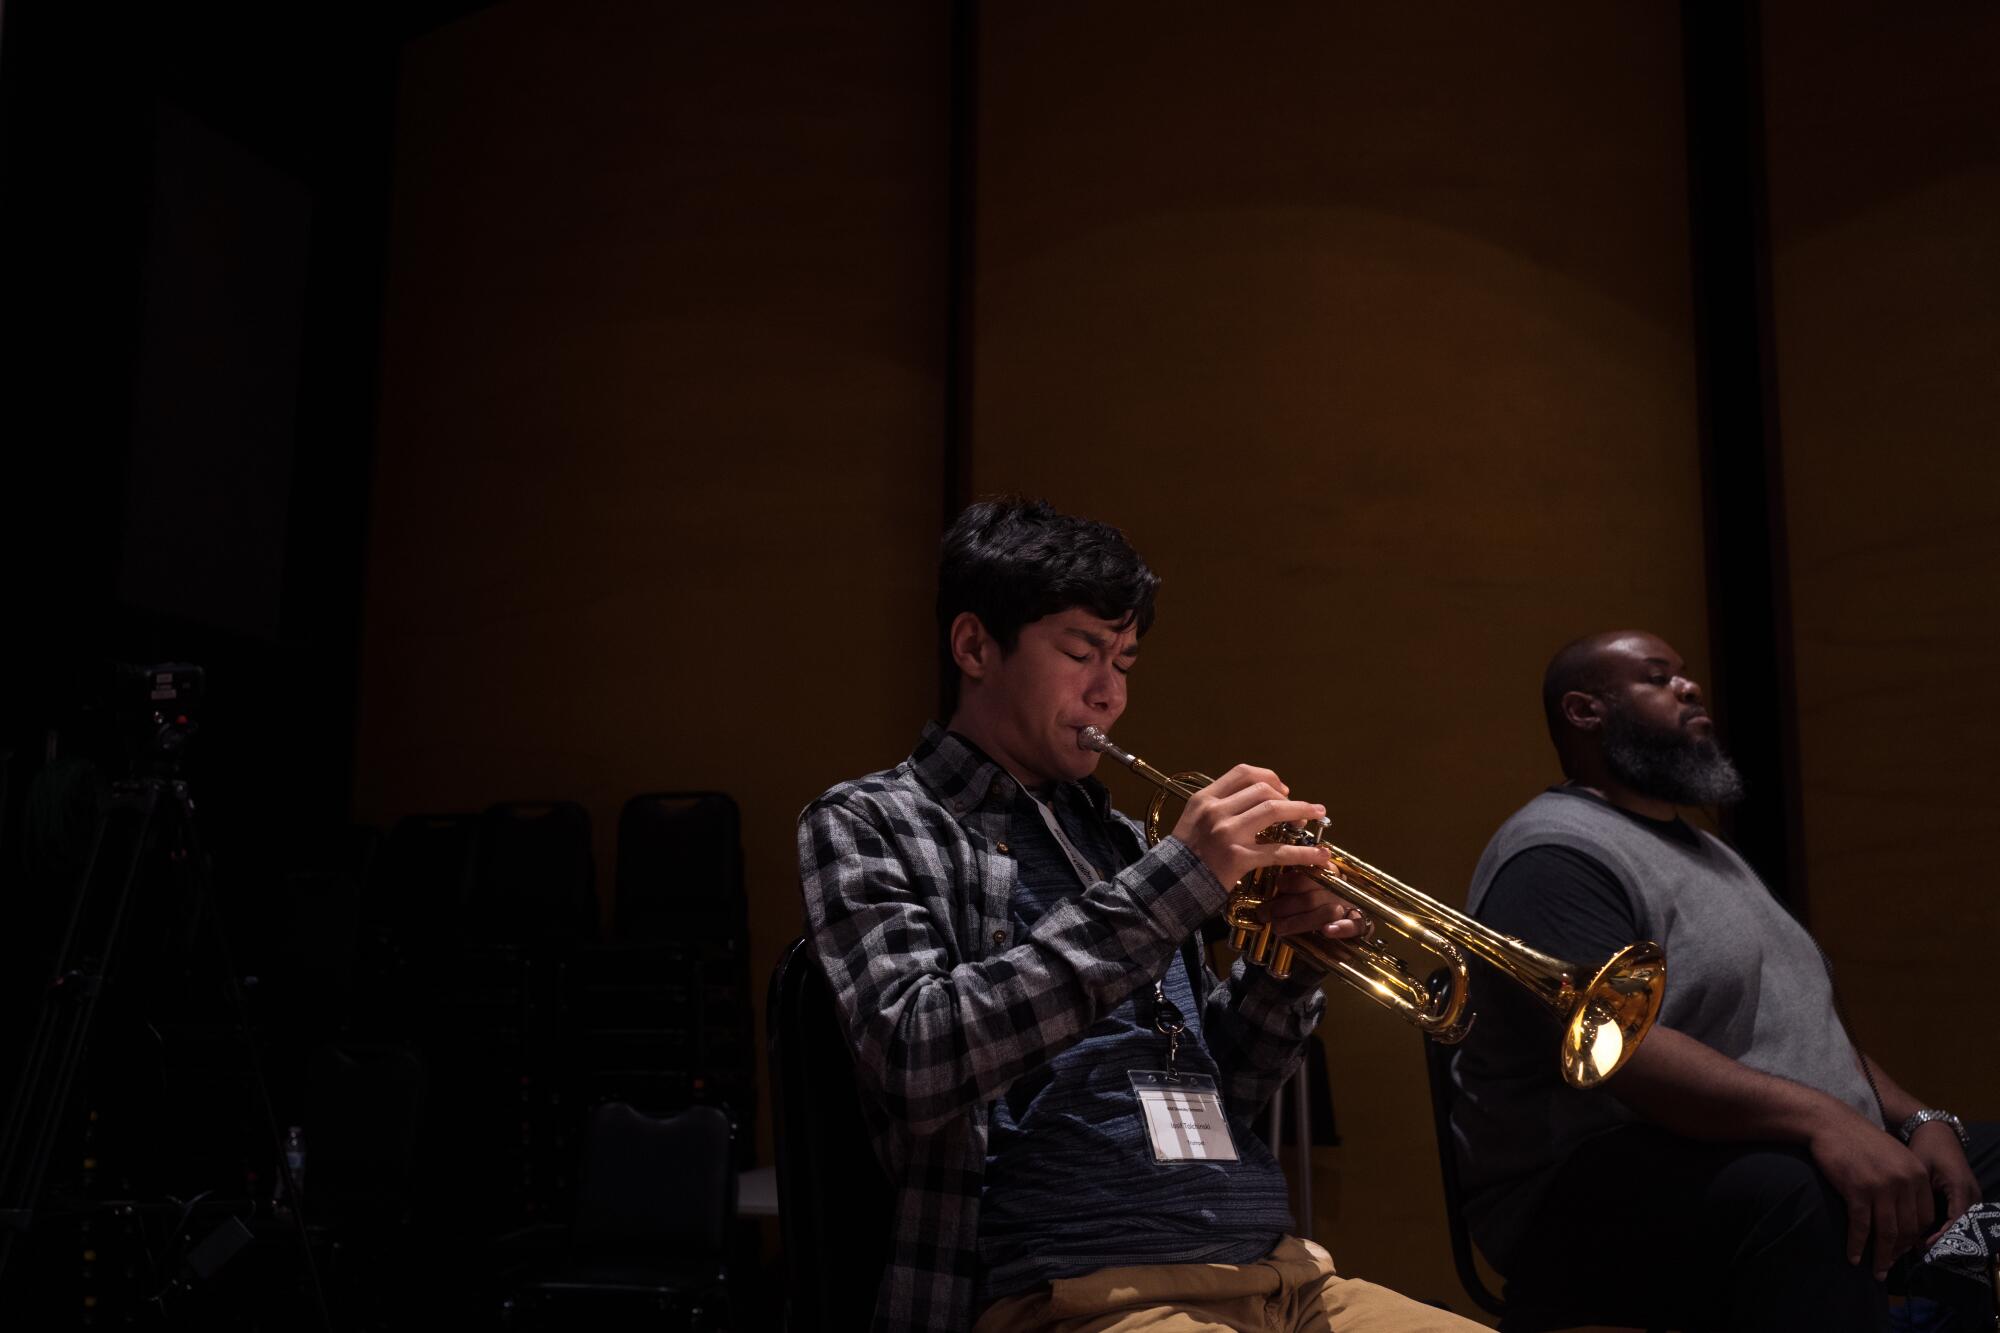 A young man plays the trumpet in a dark room.